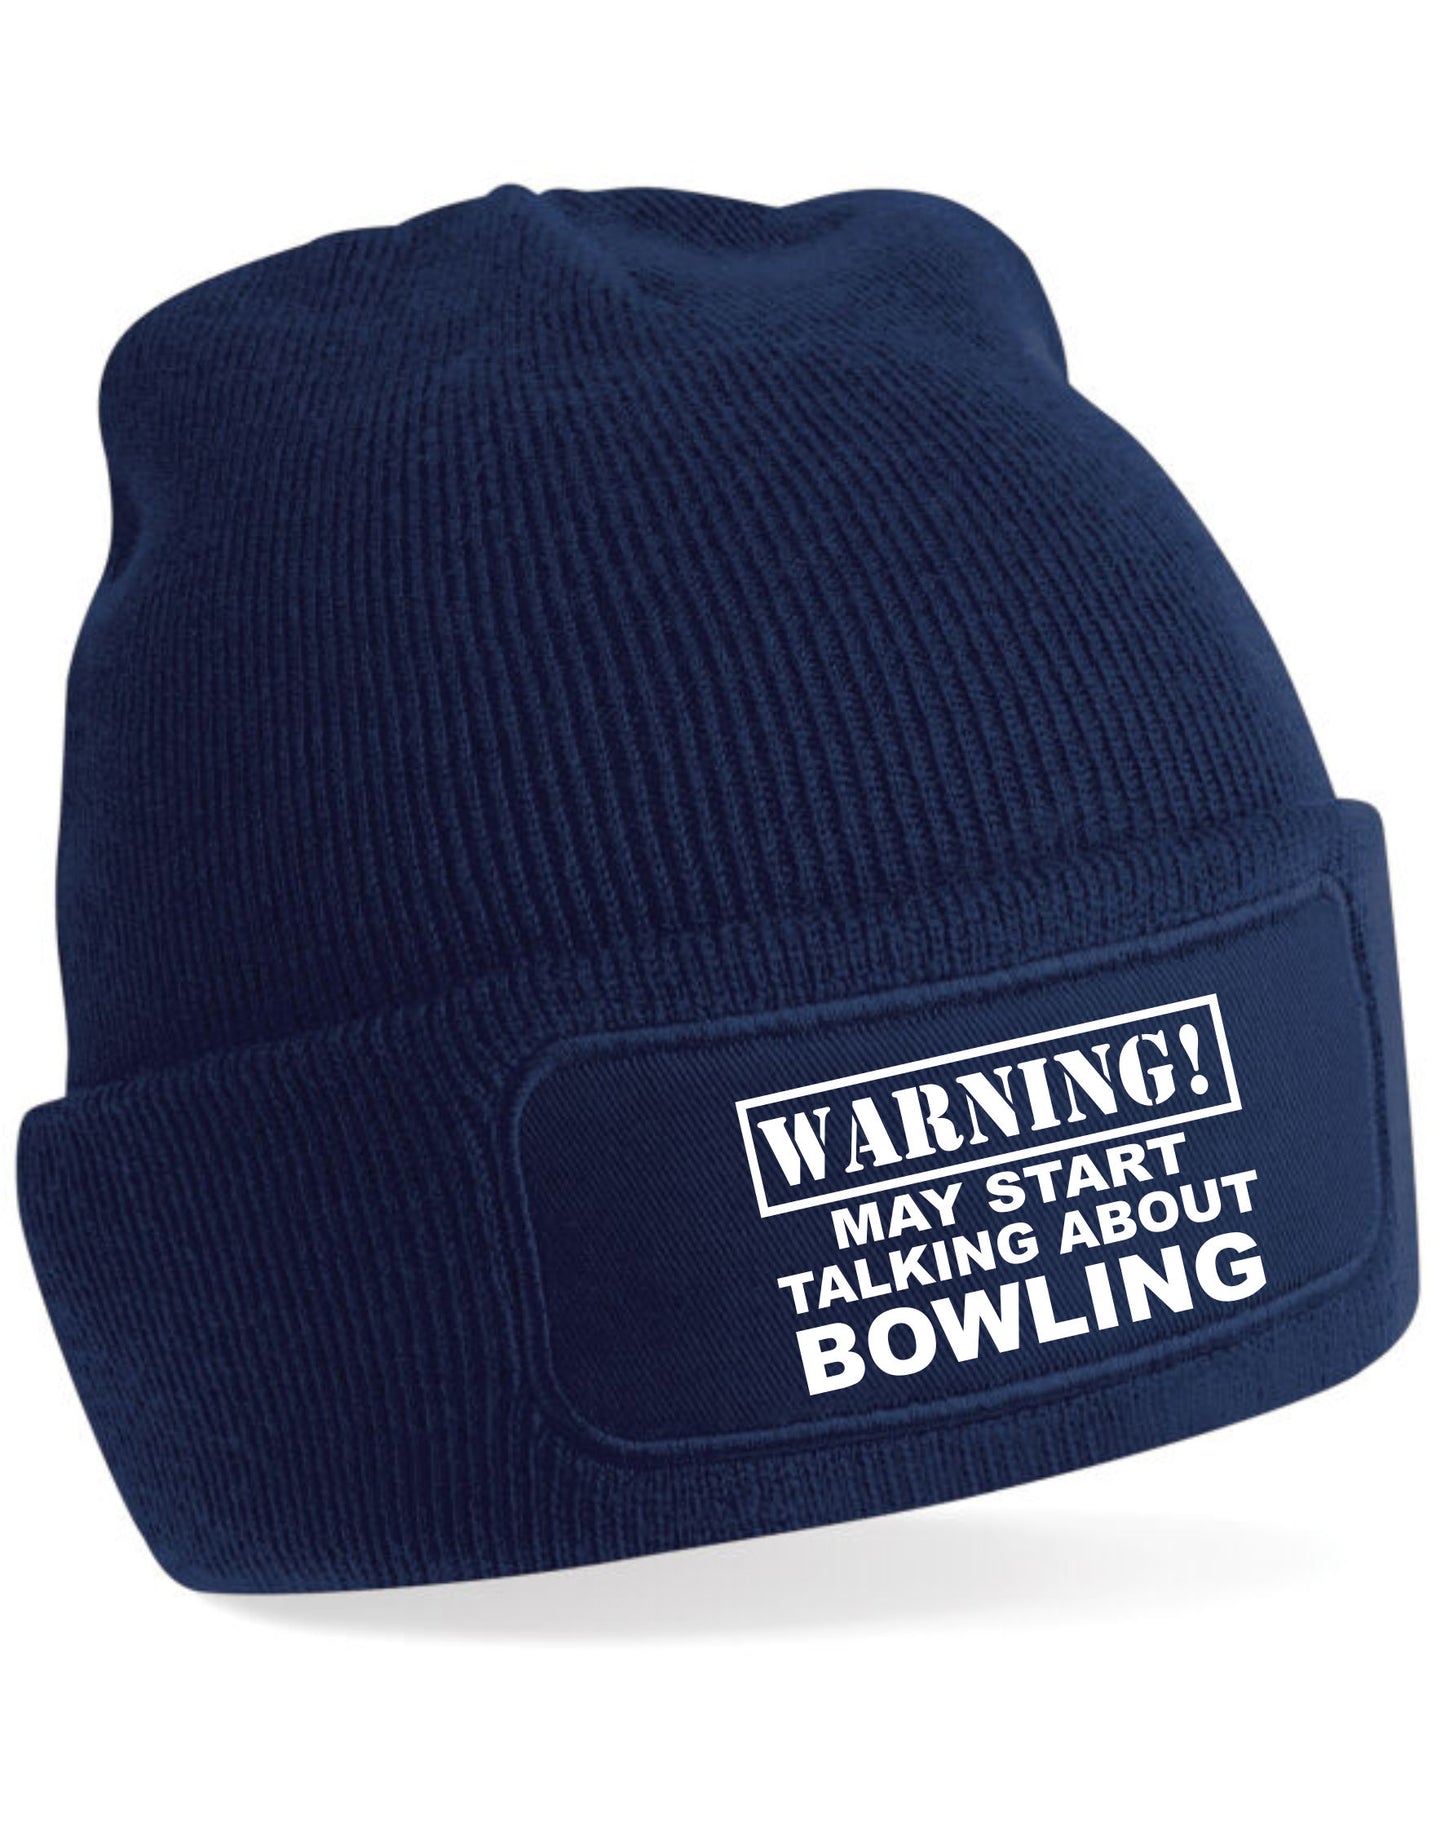 May Talk About Bowling Hat Crown Green Gift For Men & Ladies Birthday